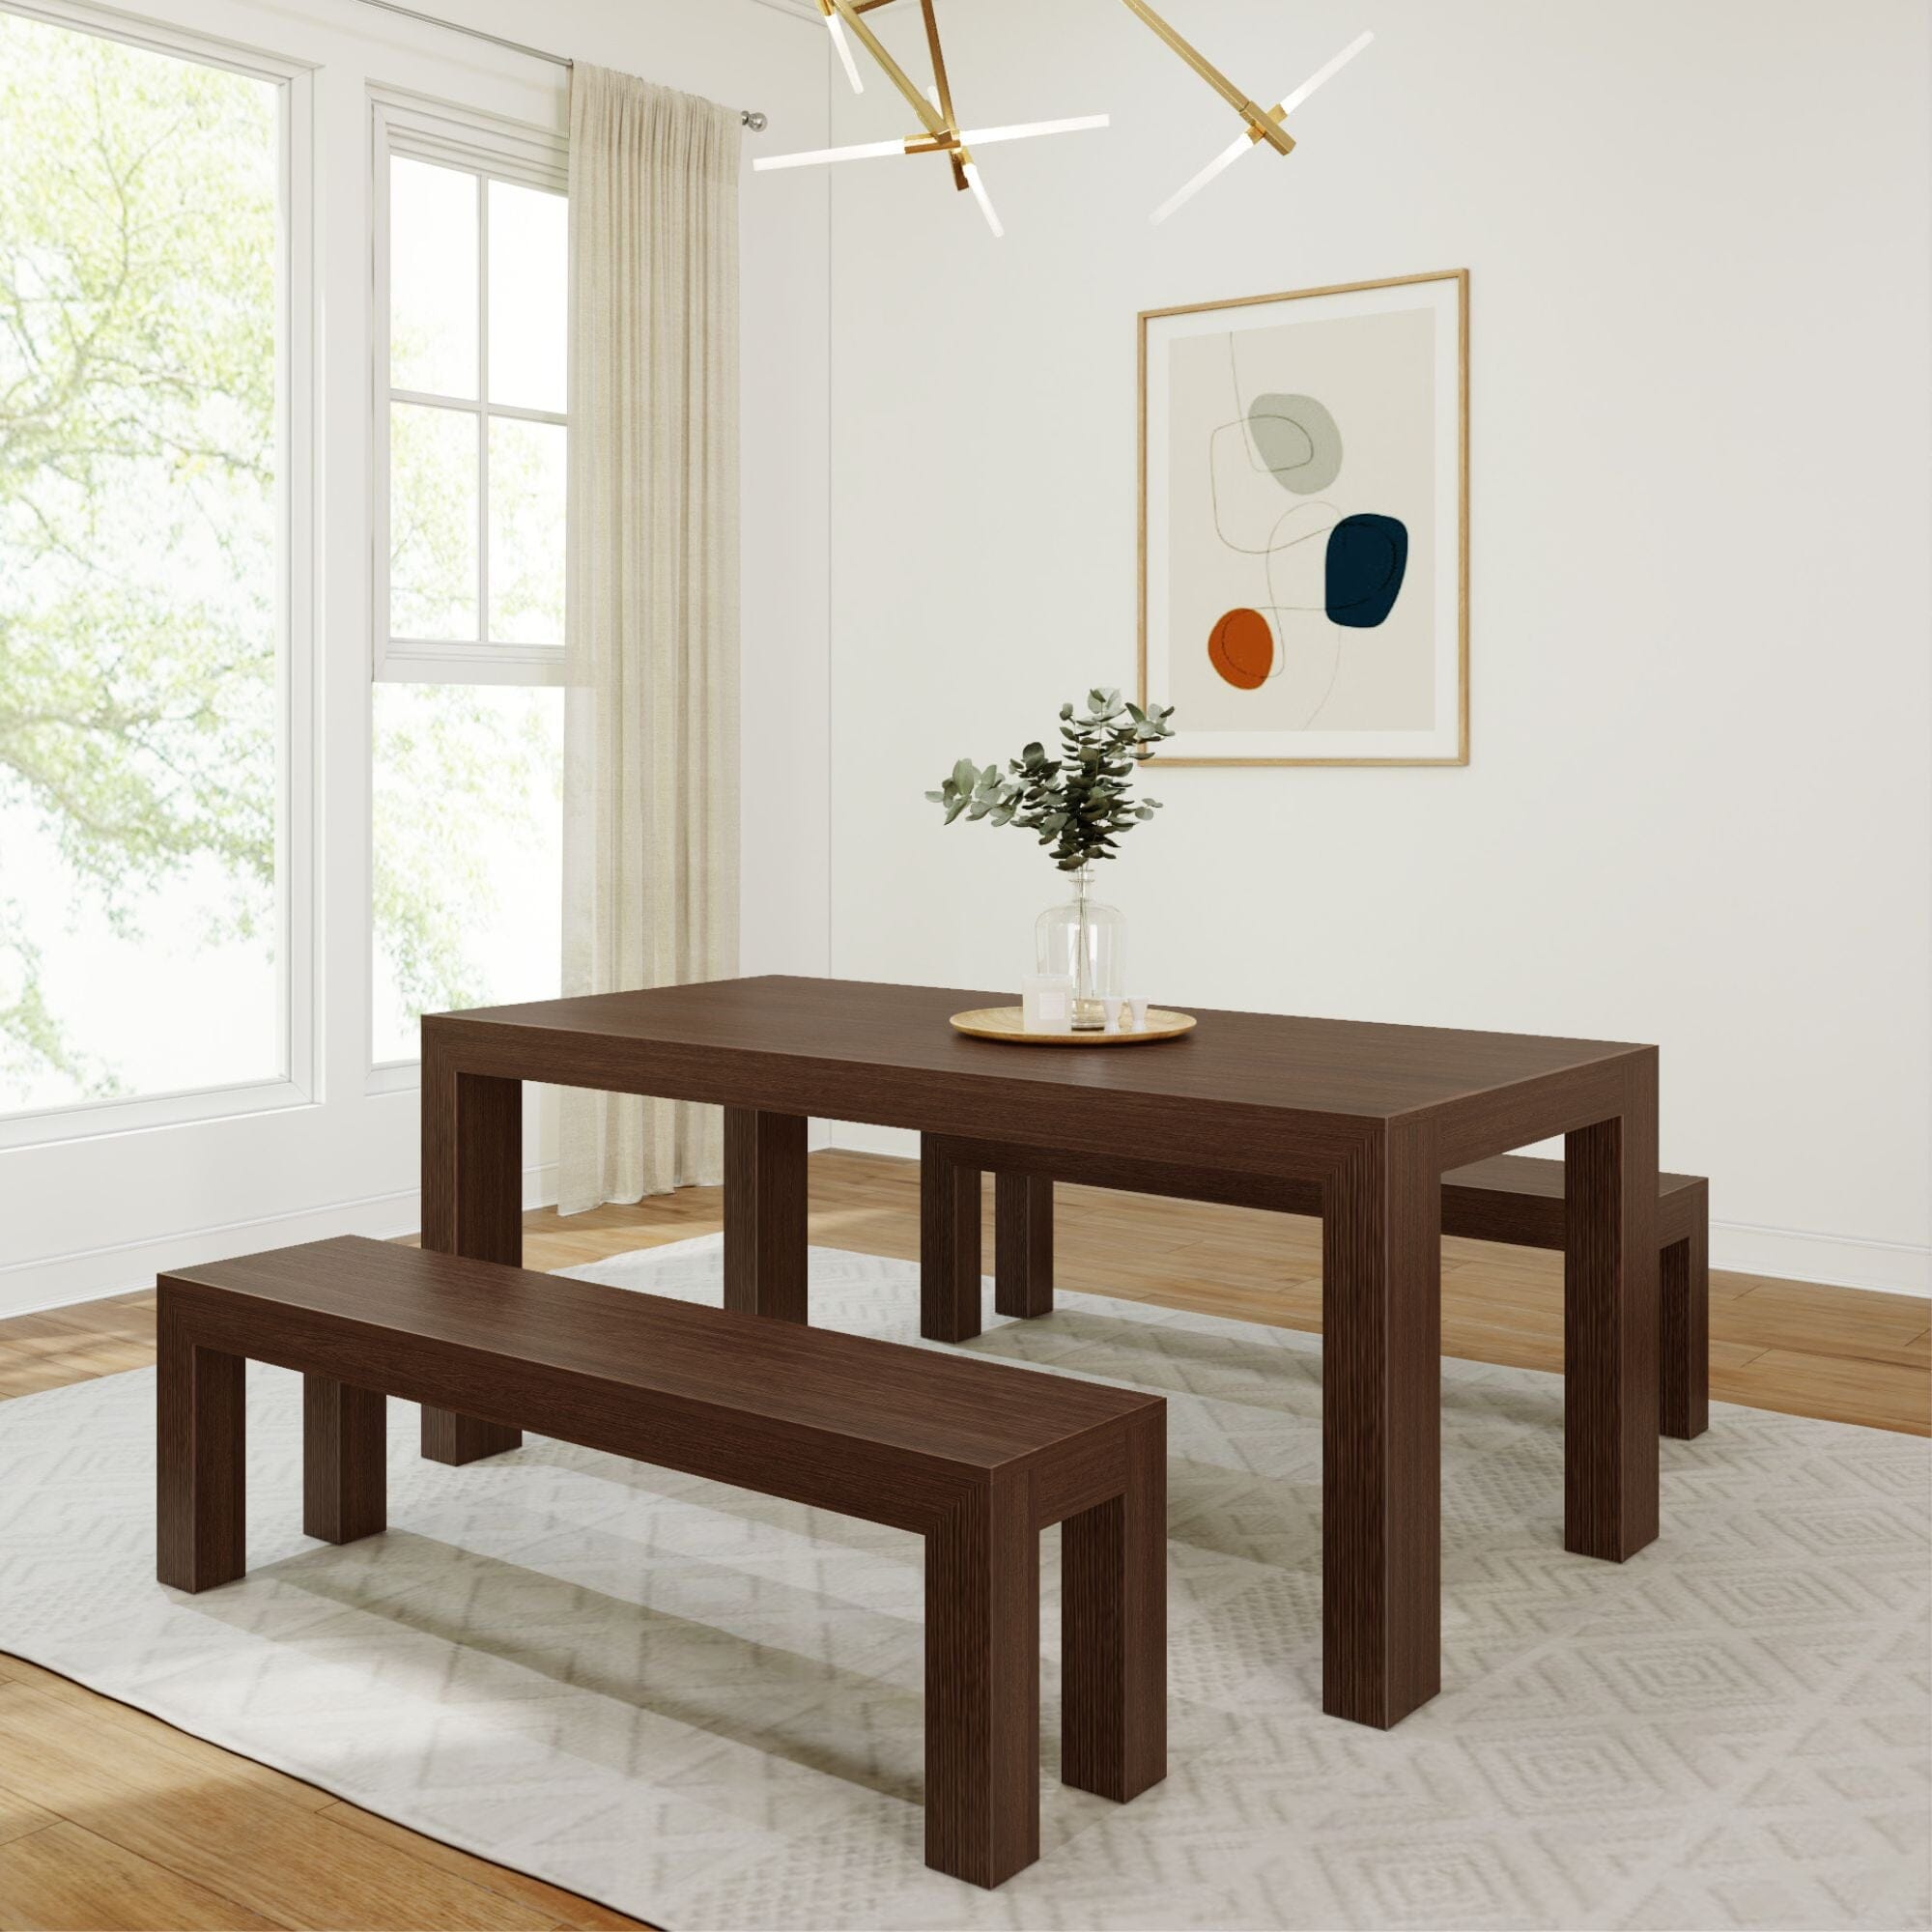 Modern Dining Table Set with 2 Benches, Solid Wood - 72 Inch ...